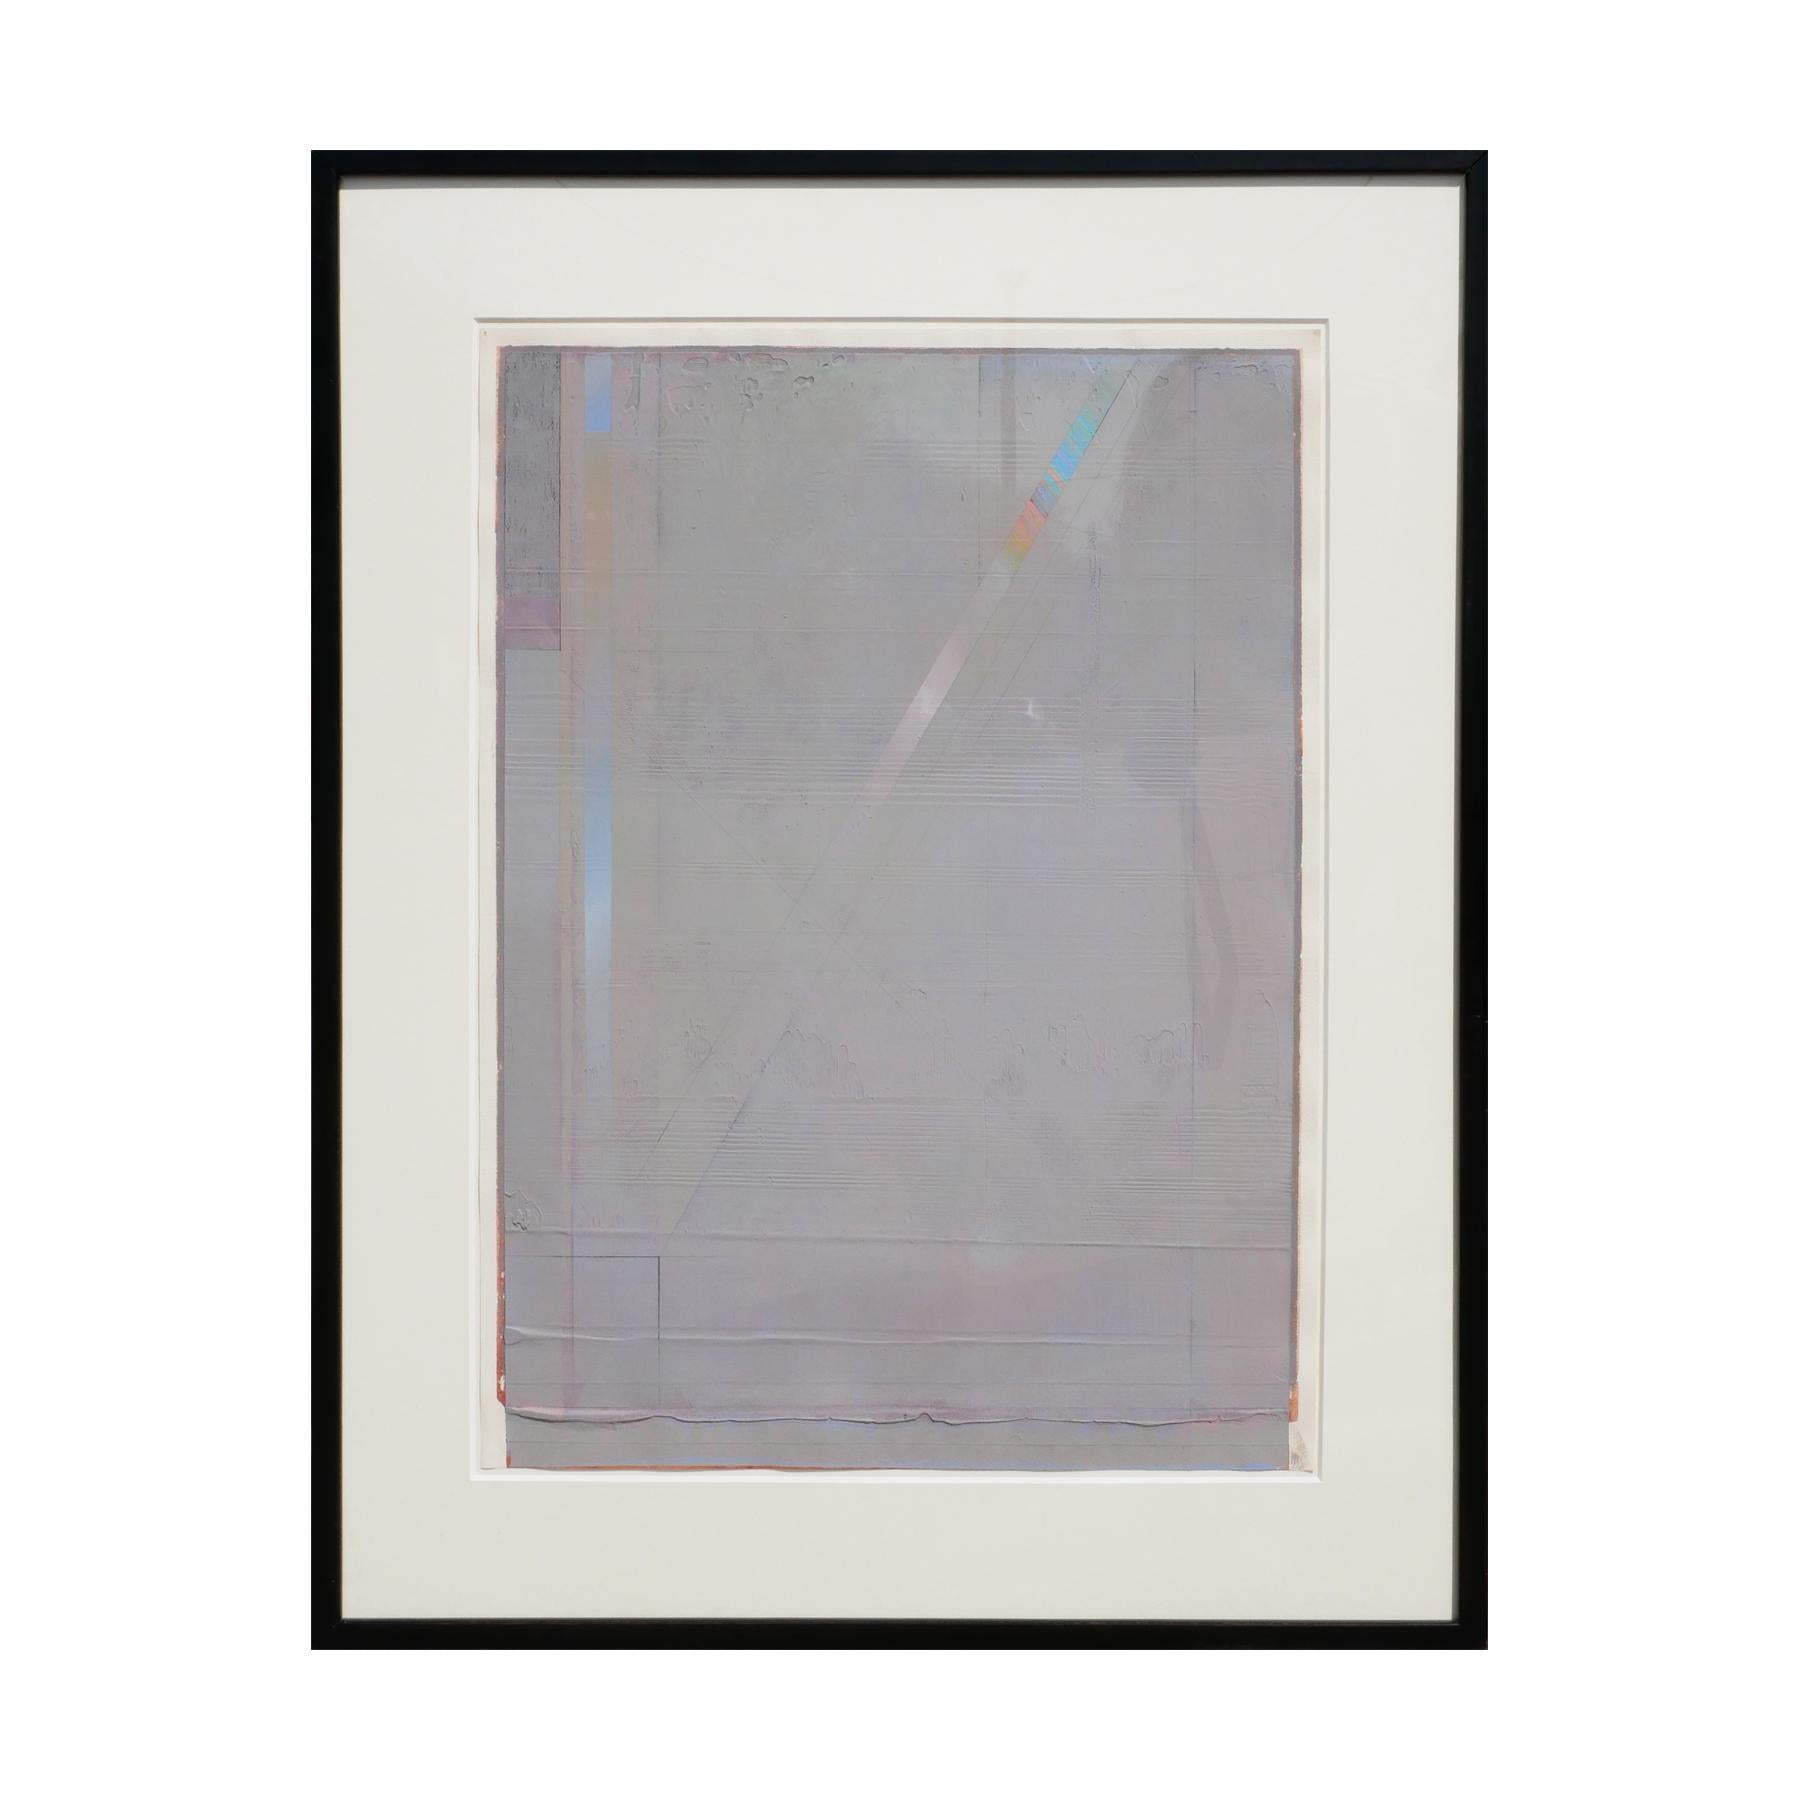 Gray-toned minimalist abstract textured print with purple, blue, and yellow tones. Unsigned. Framed and matted in a modern black frame.

Dimensions Without Frame: H 28.63 in. x W 20.63 in.

